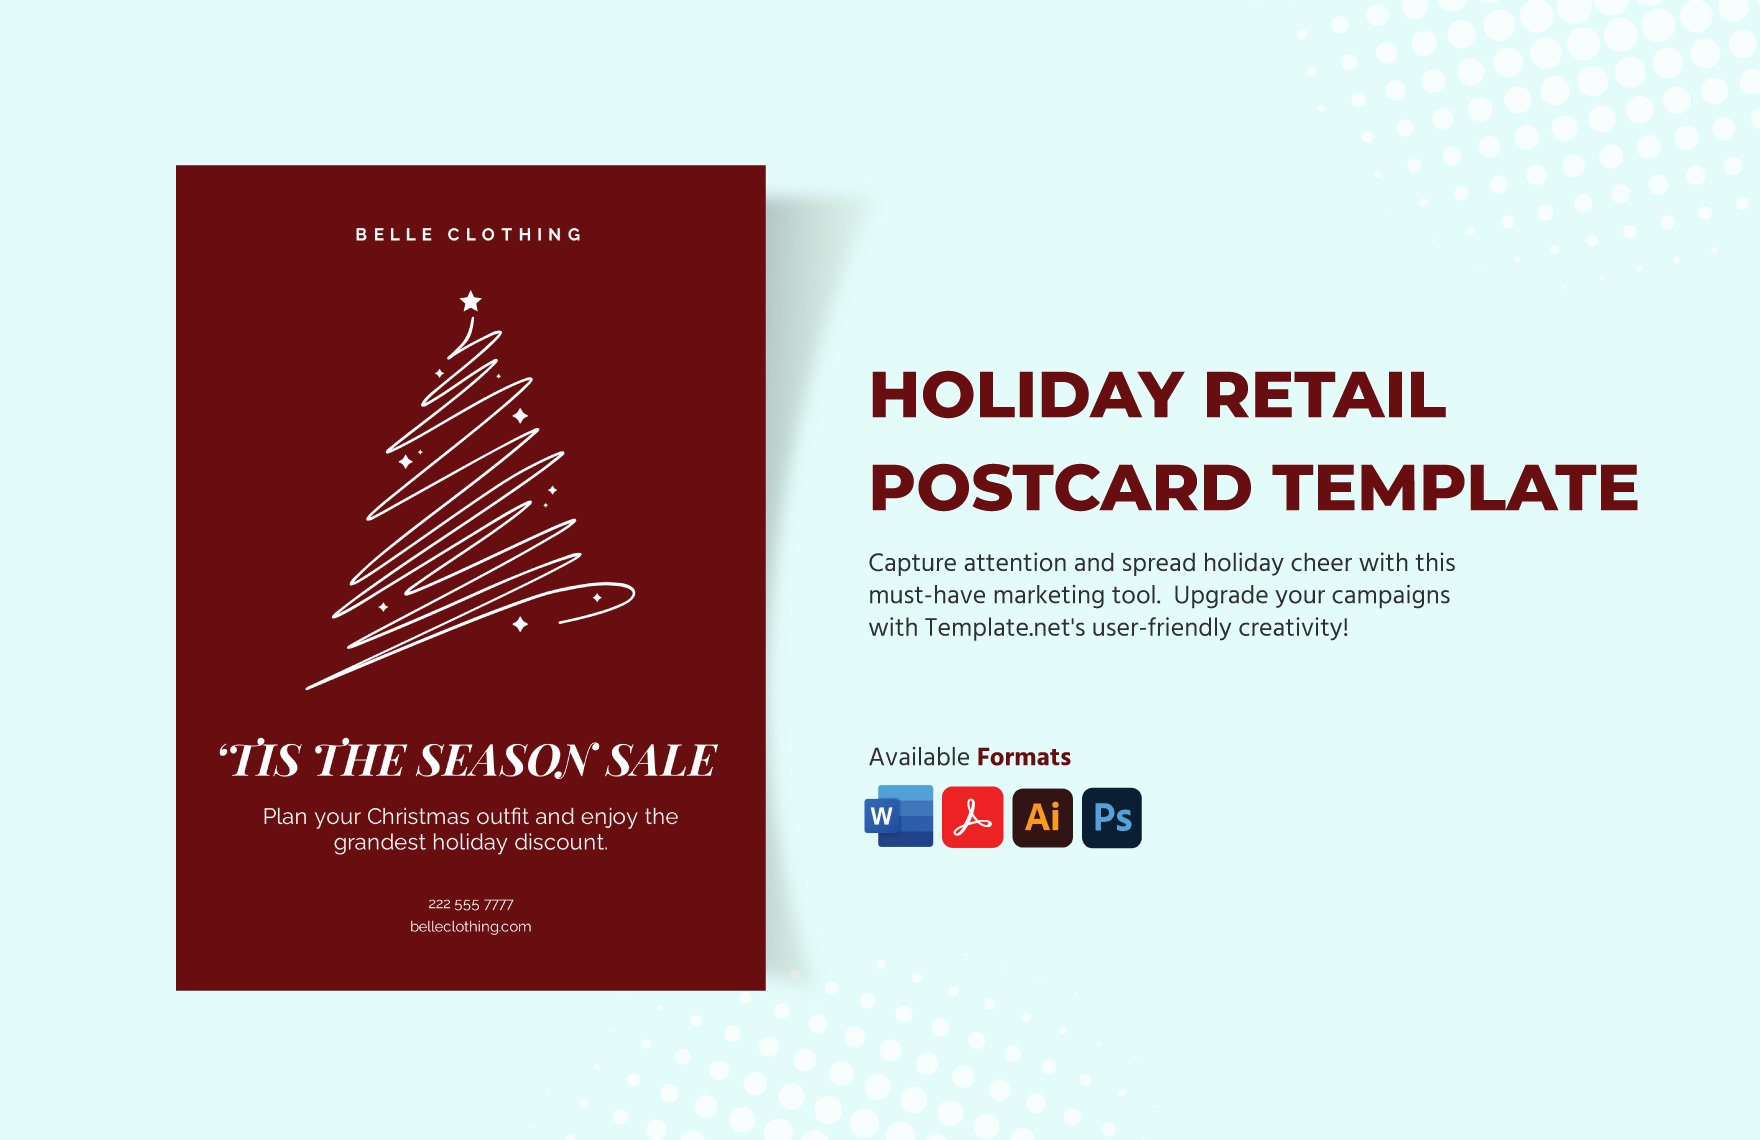 Holiday Retail Postcard Template